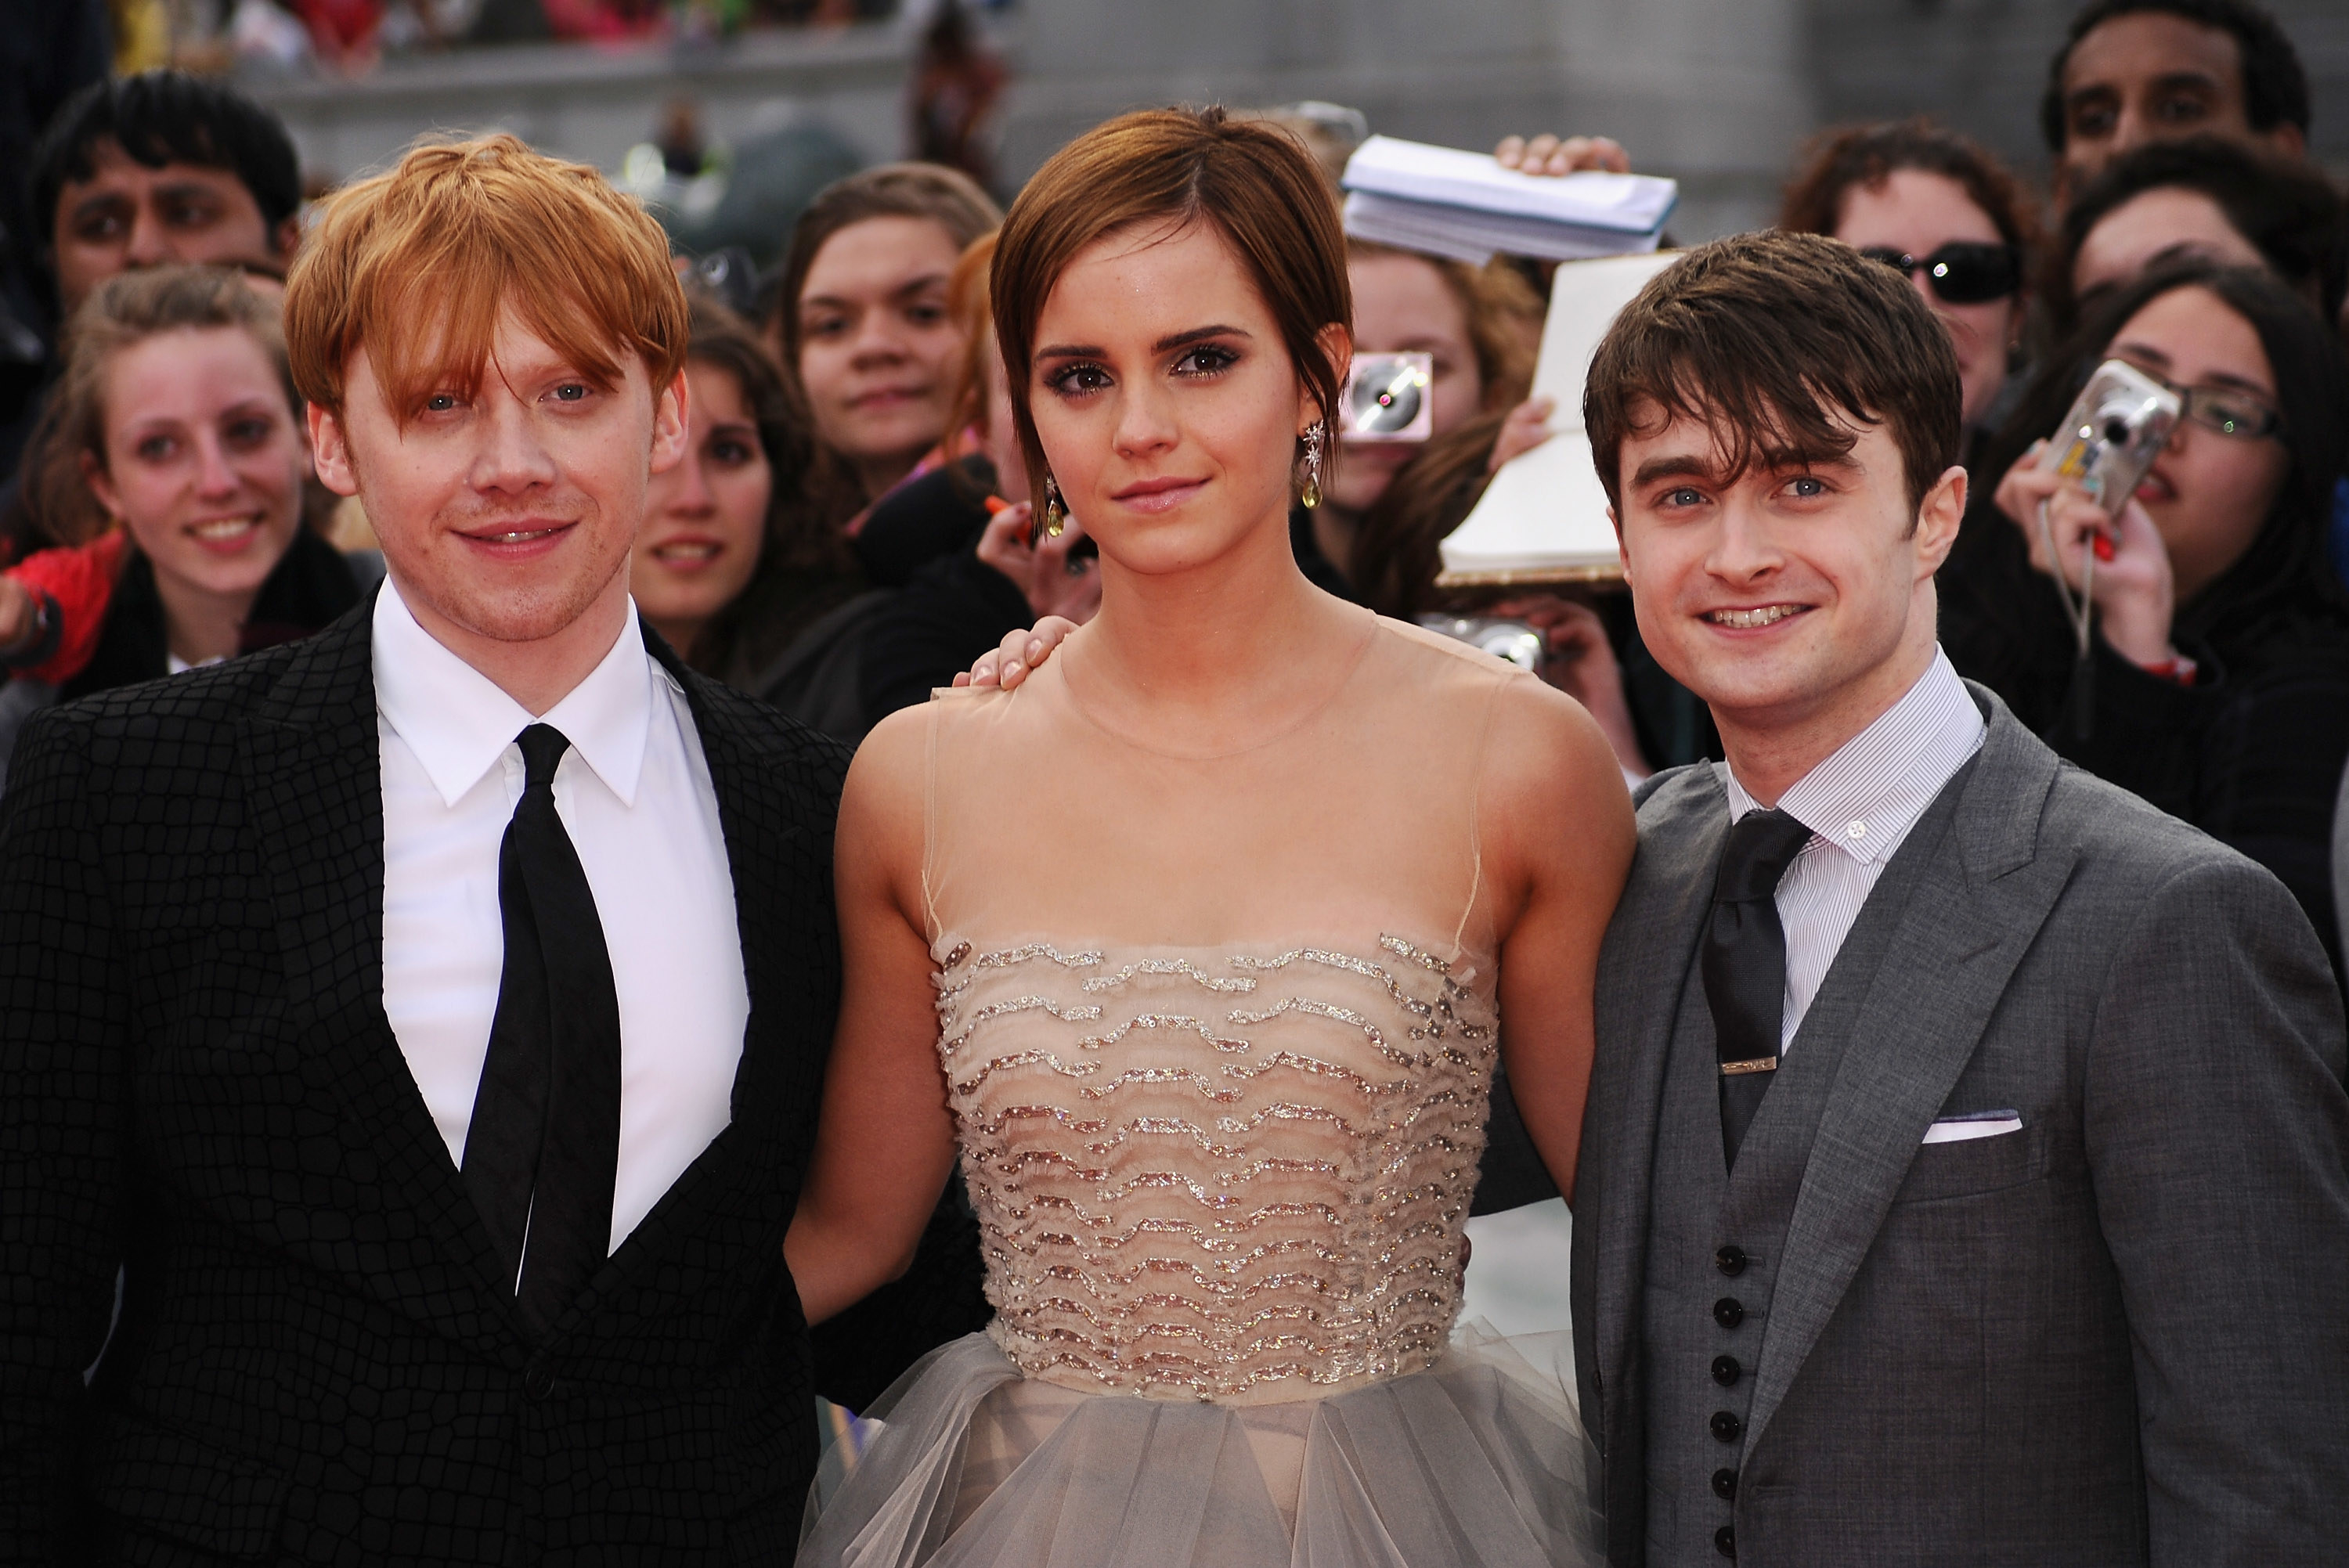 The three cast members standing together on the red carpet at the premiere of one of the Harry Potter films